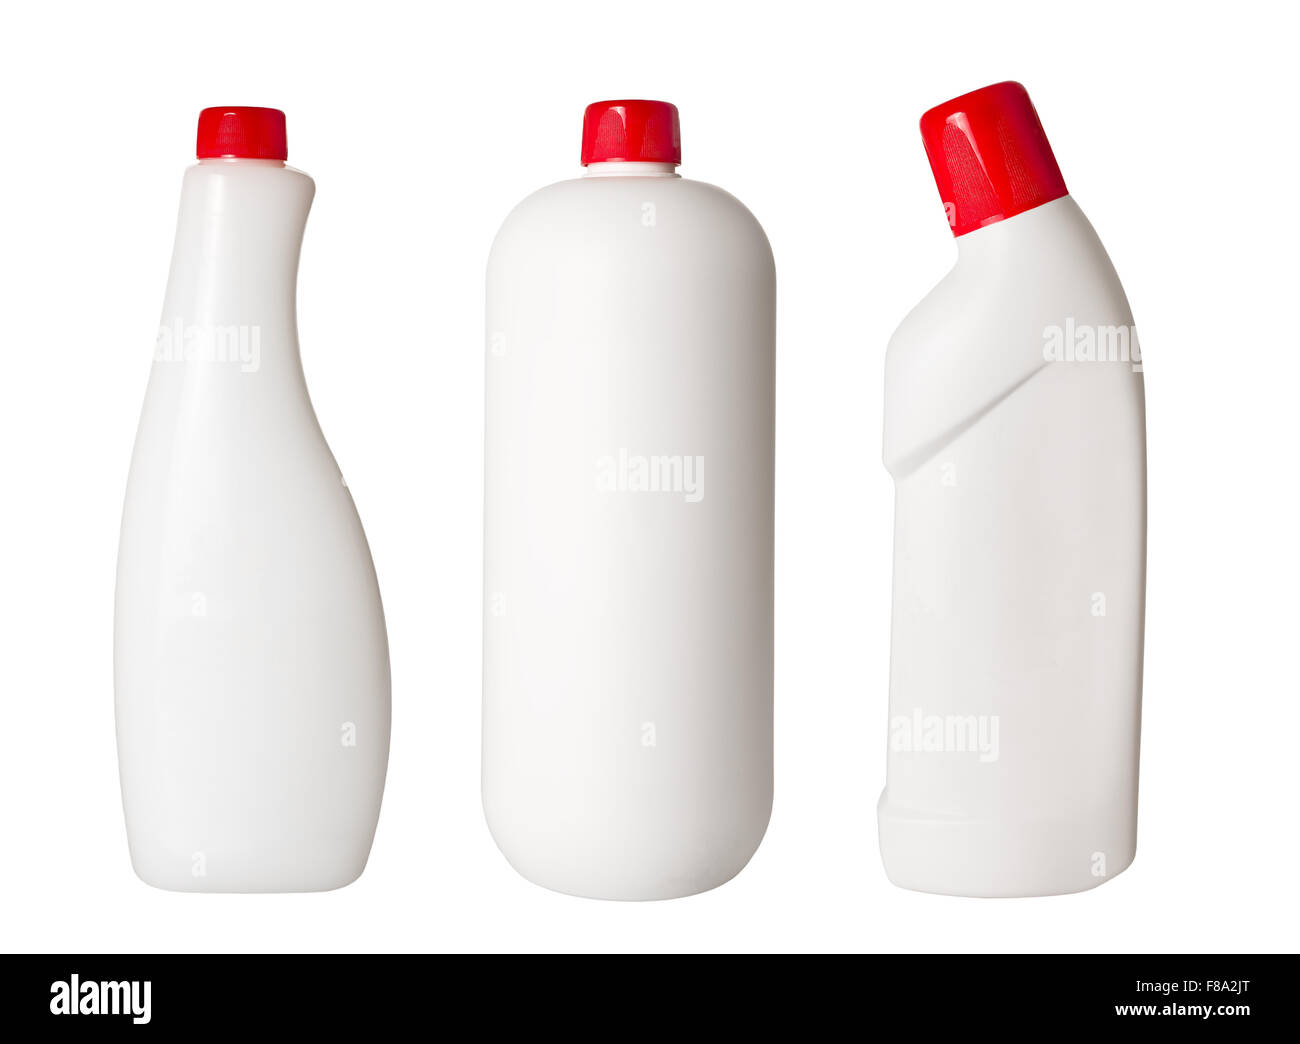 Plastic containers for household detergents on white background Stock Photo